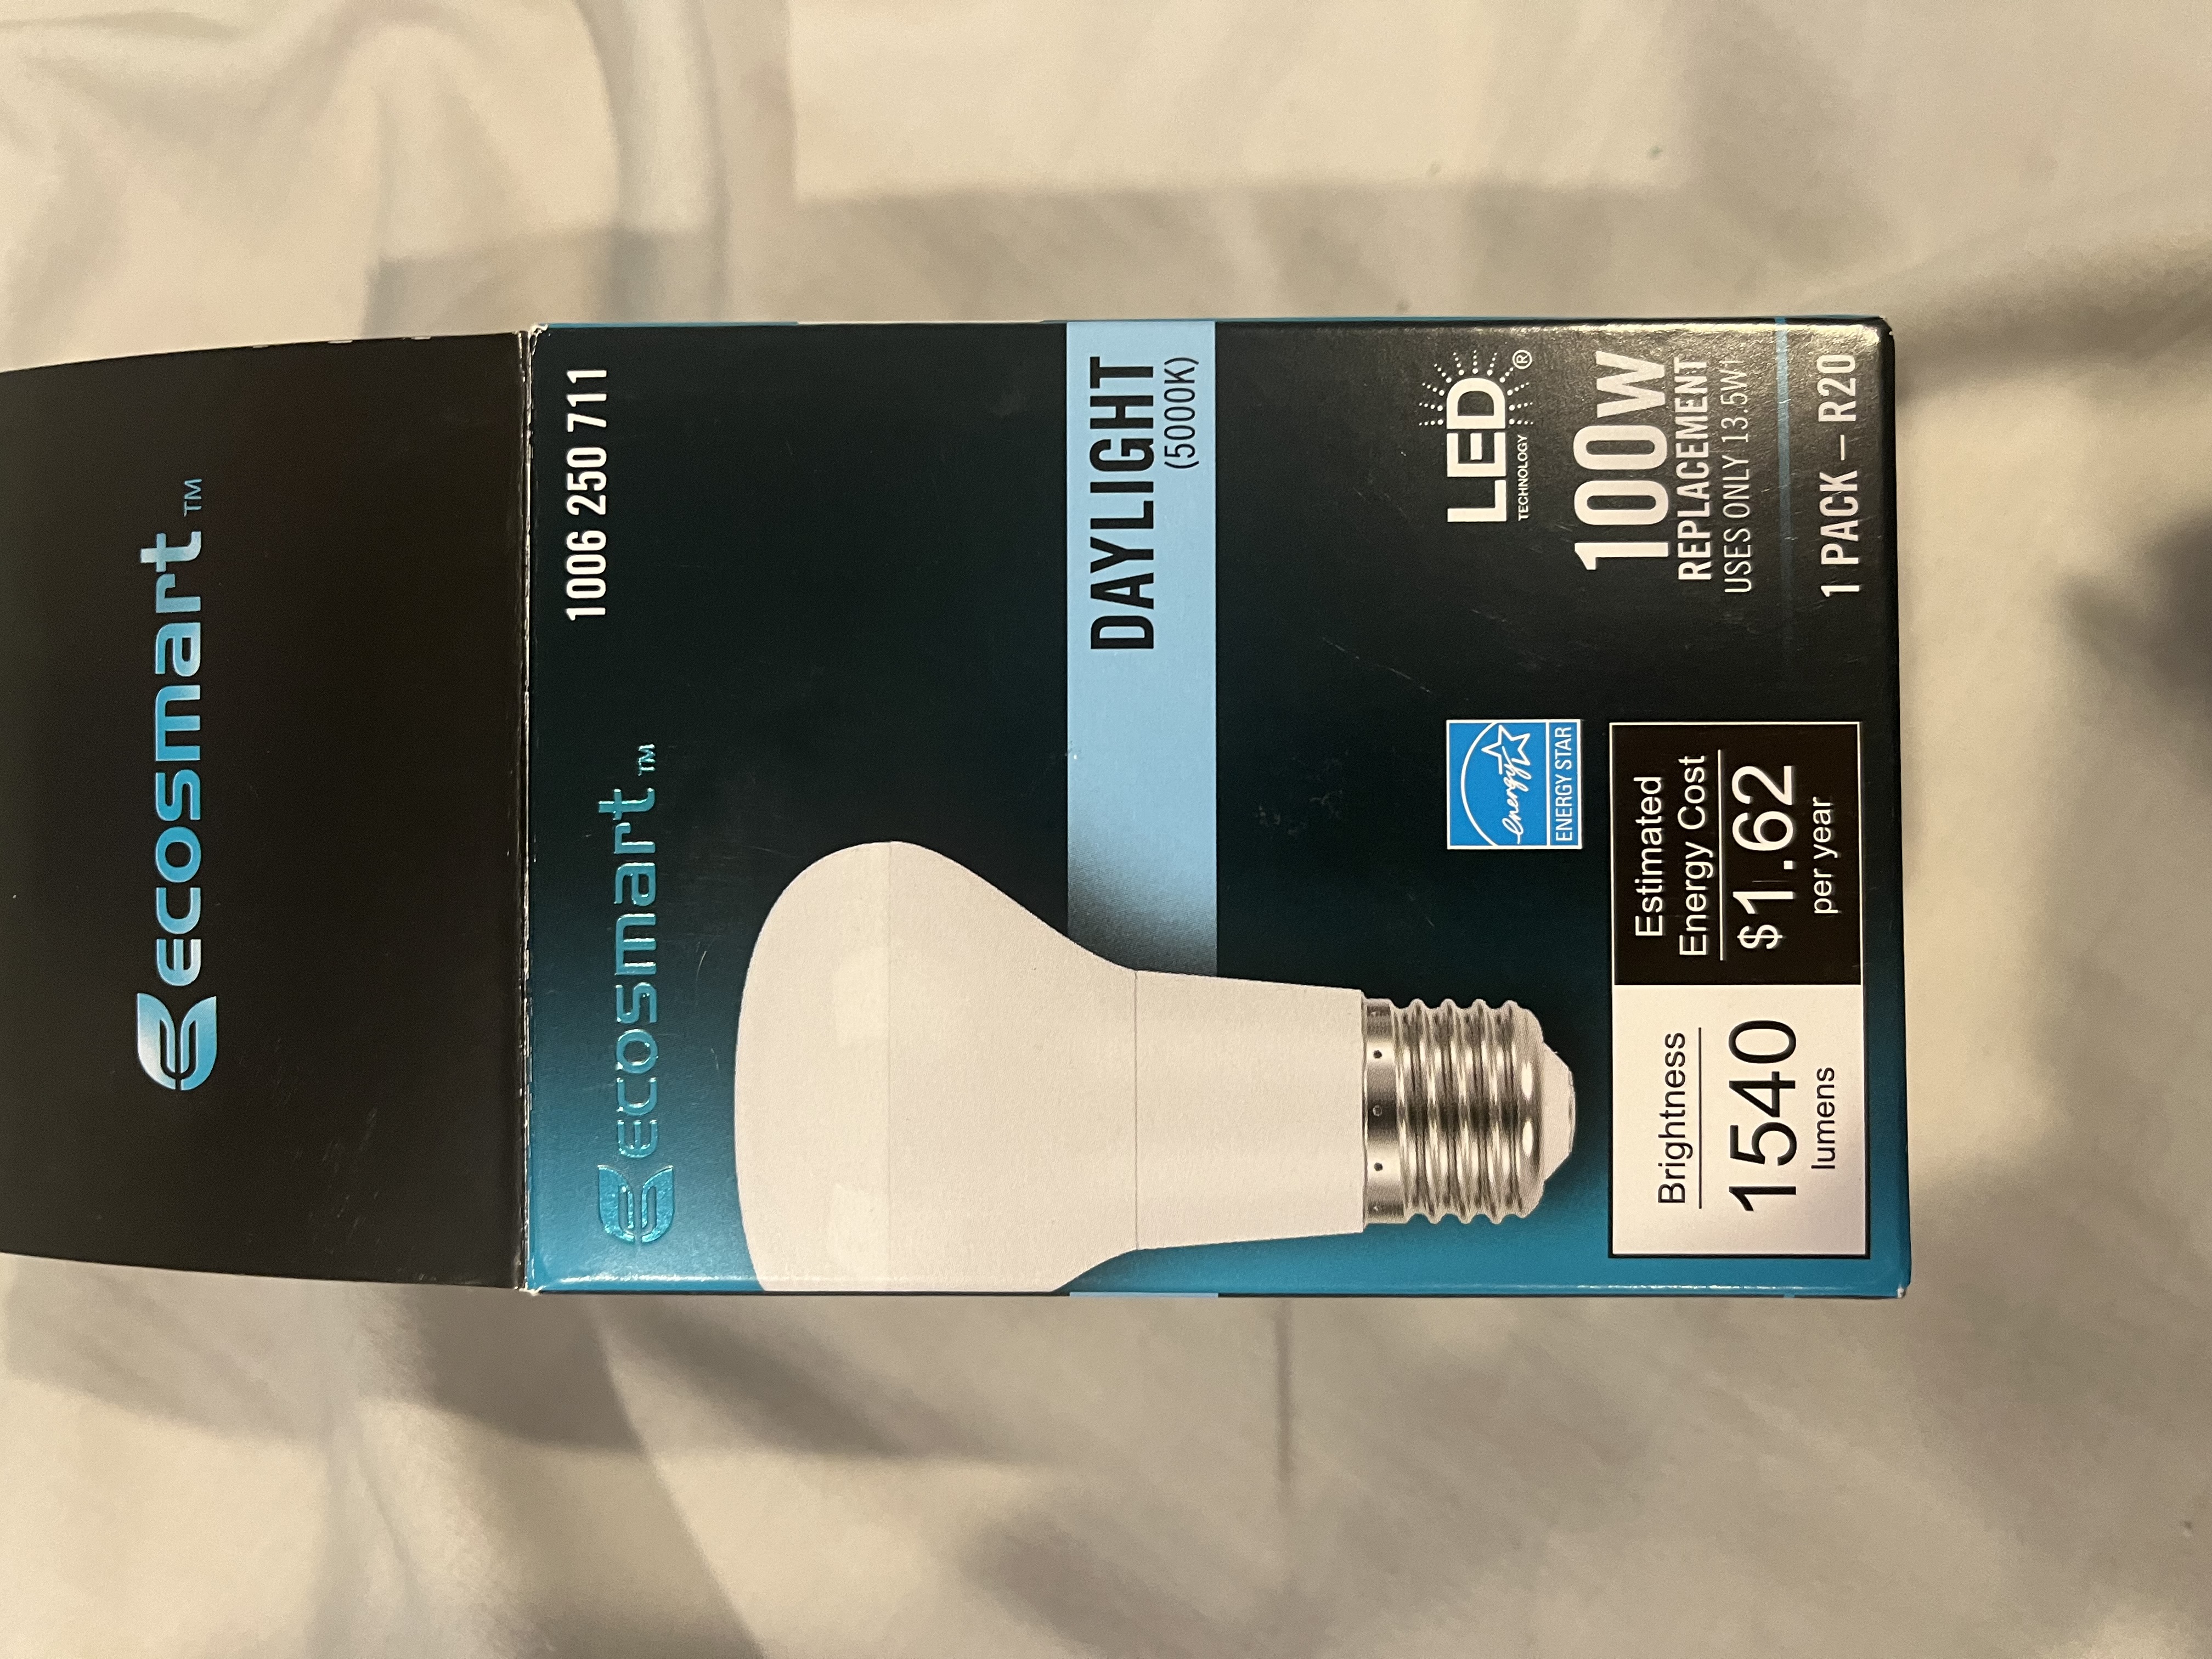 This is the lightbulb I have.